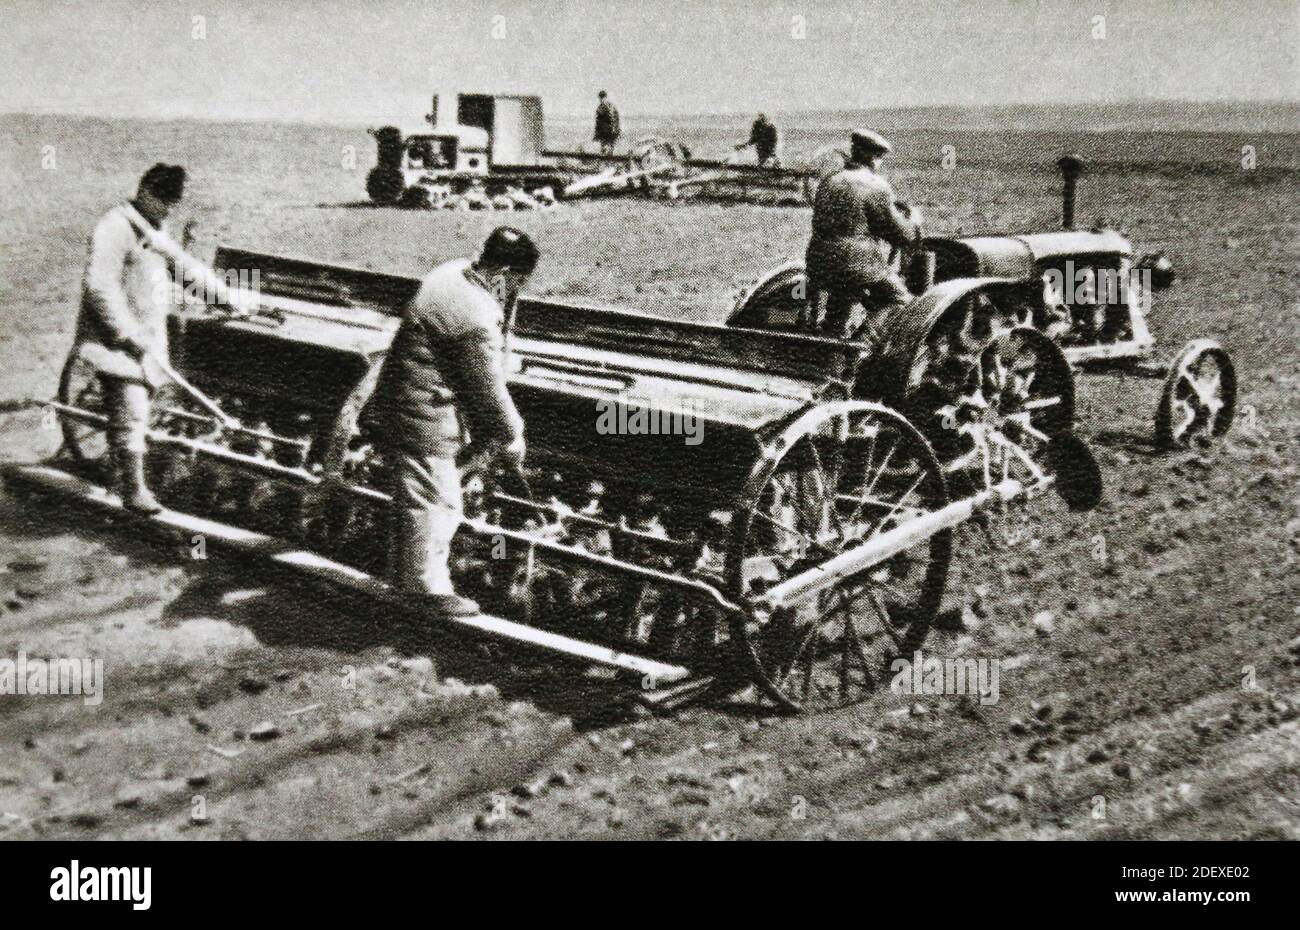 Sowing sugar beet on the Stalin collective farm in the Yampolsky district (Ukraine) of the USSR in the 1950s. Stock Photo